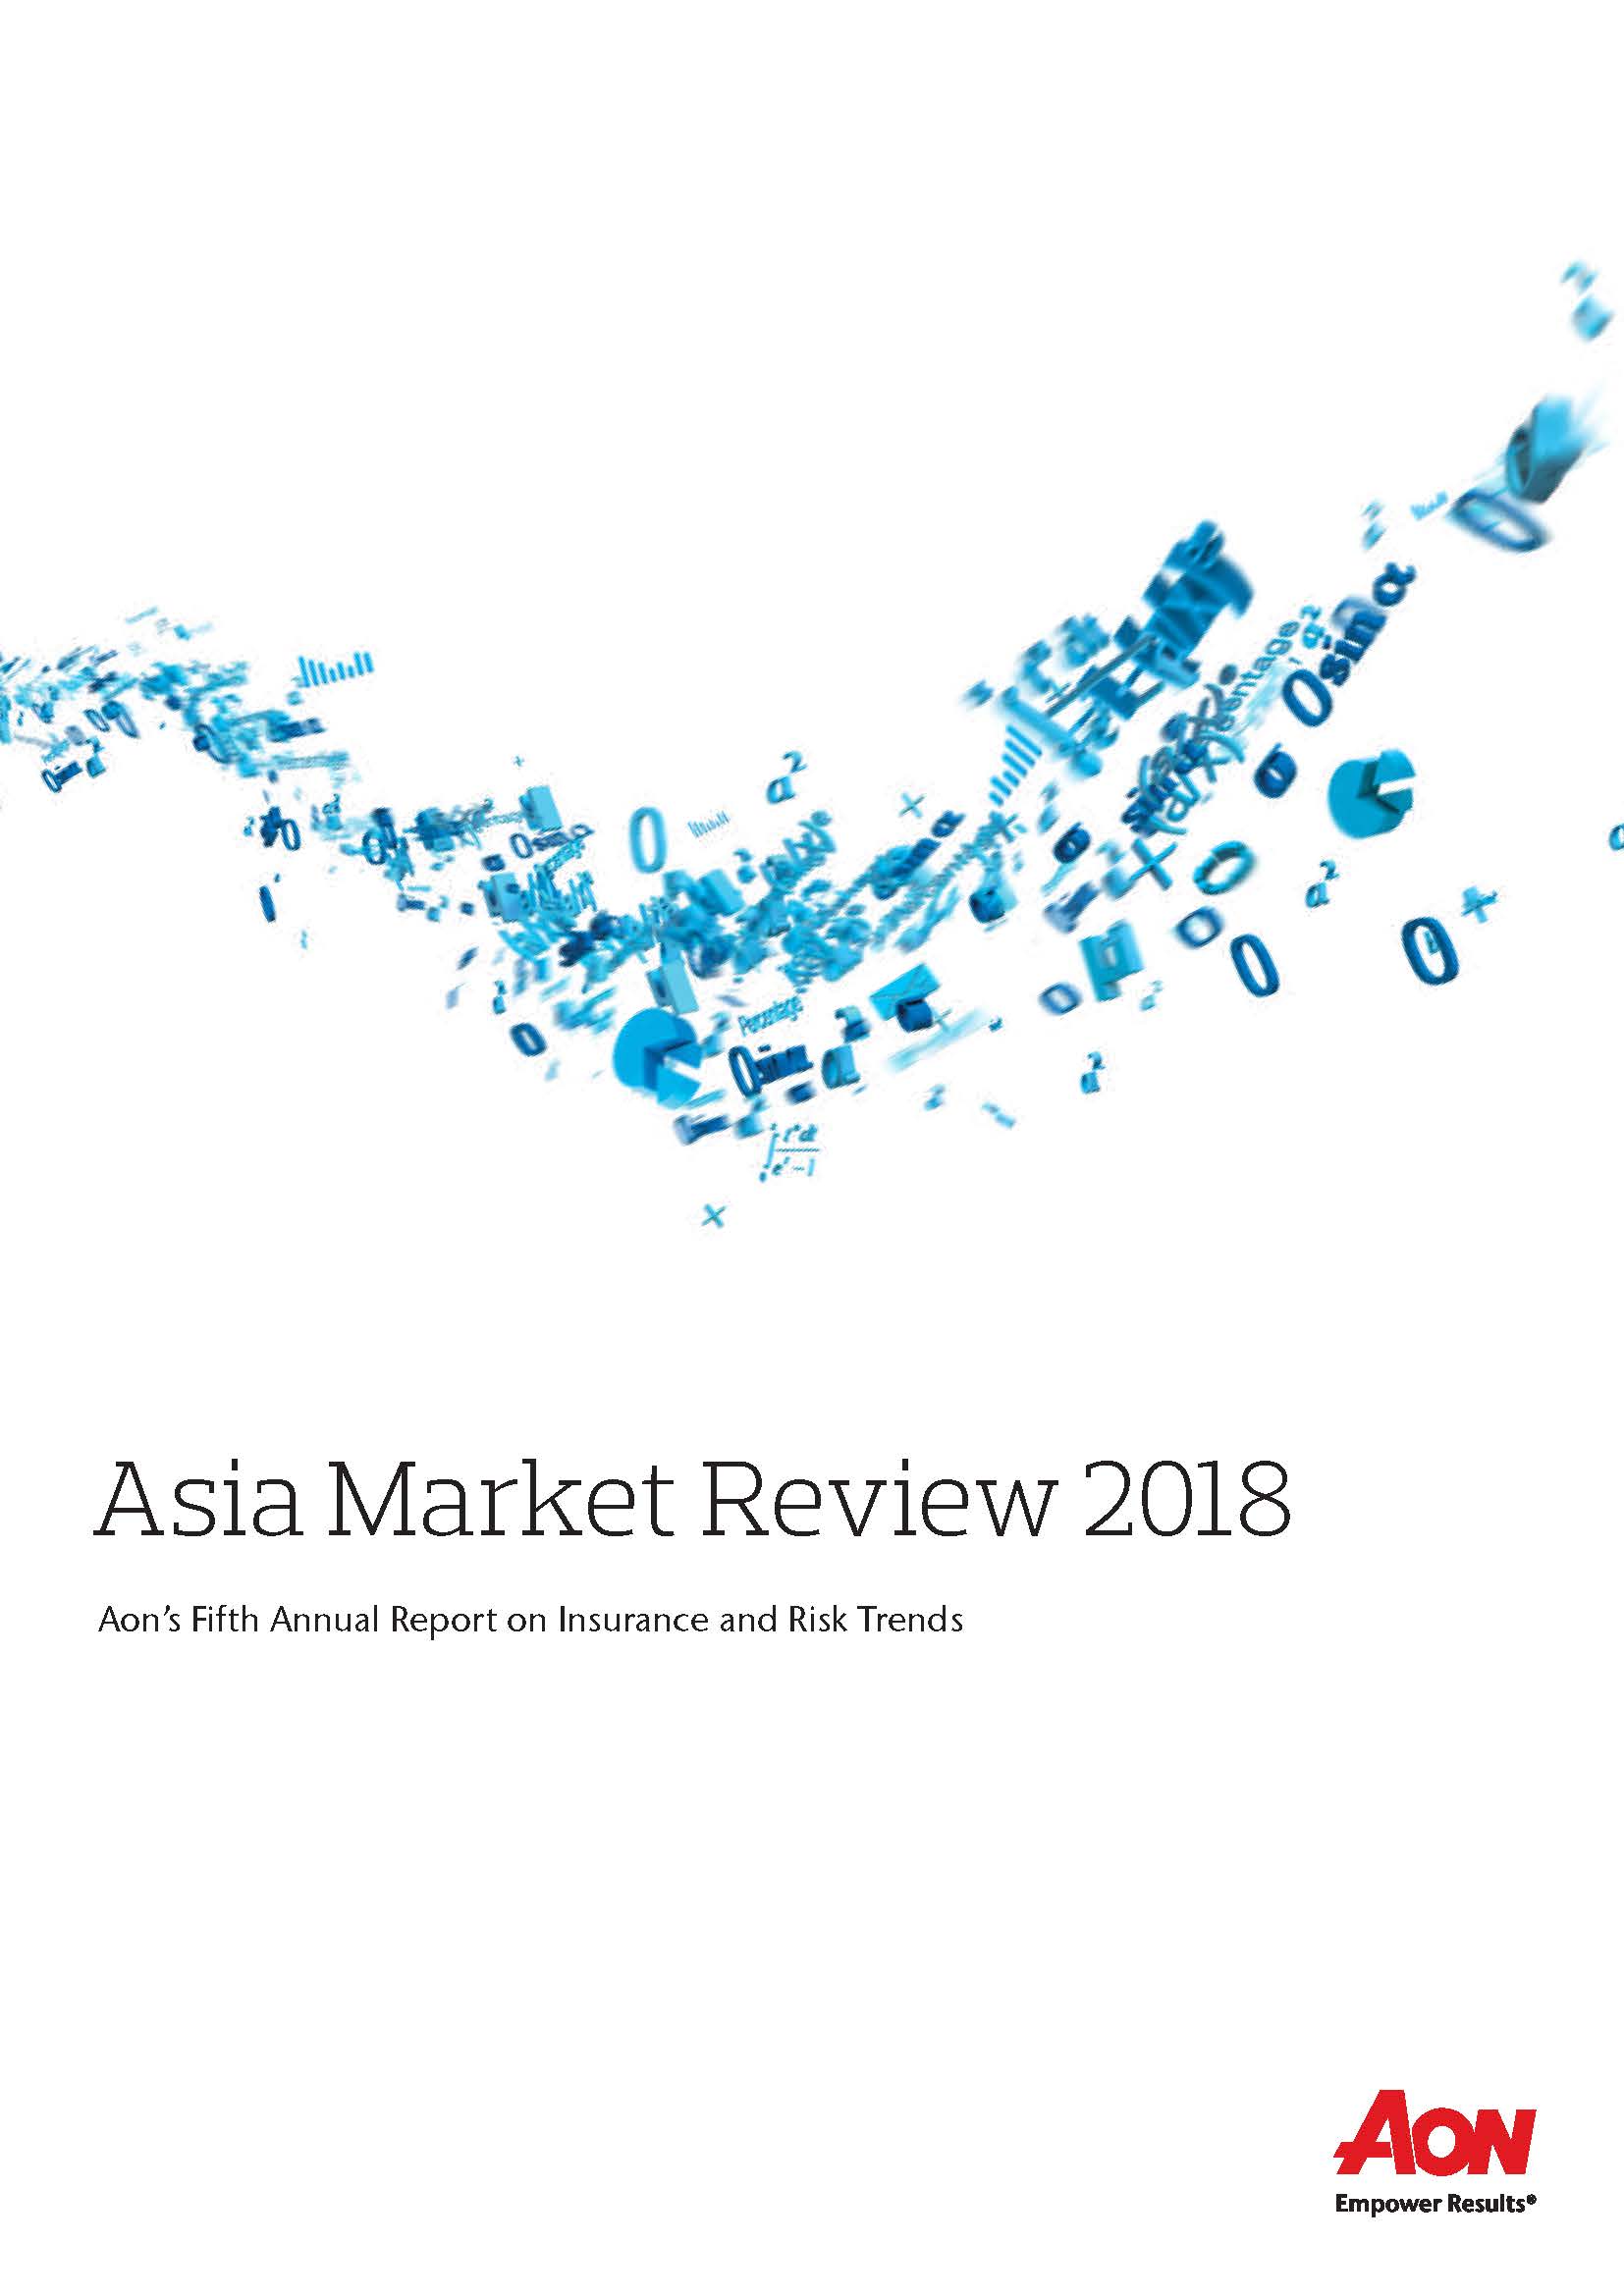 Asia Market Review 2018